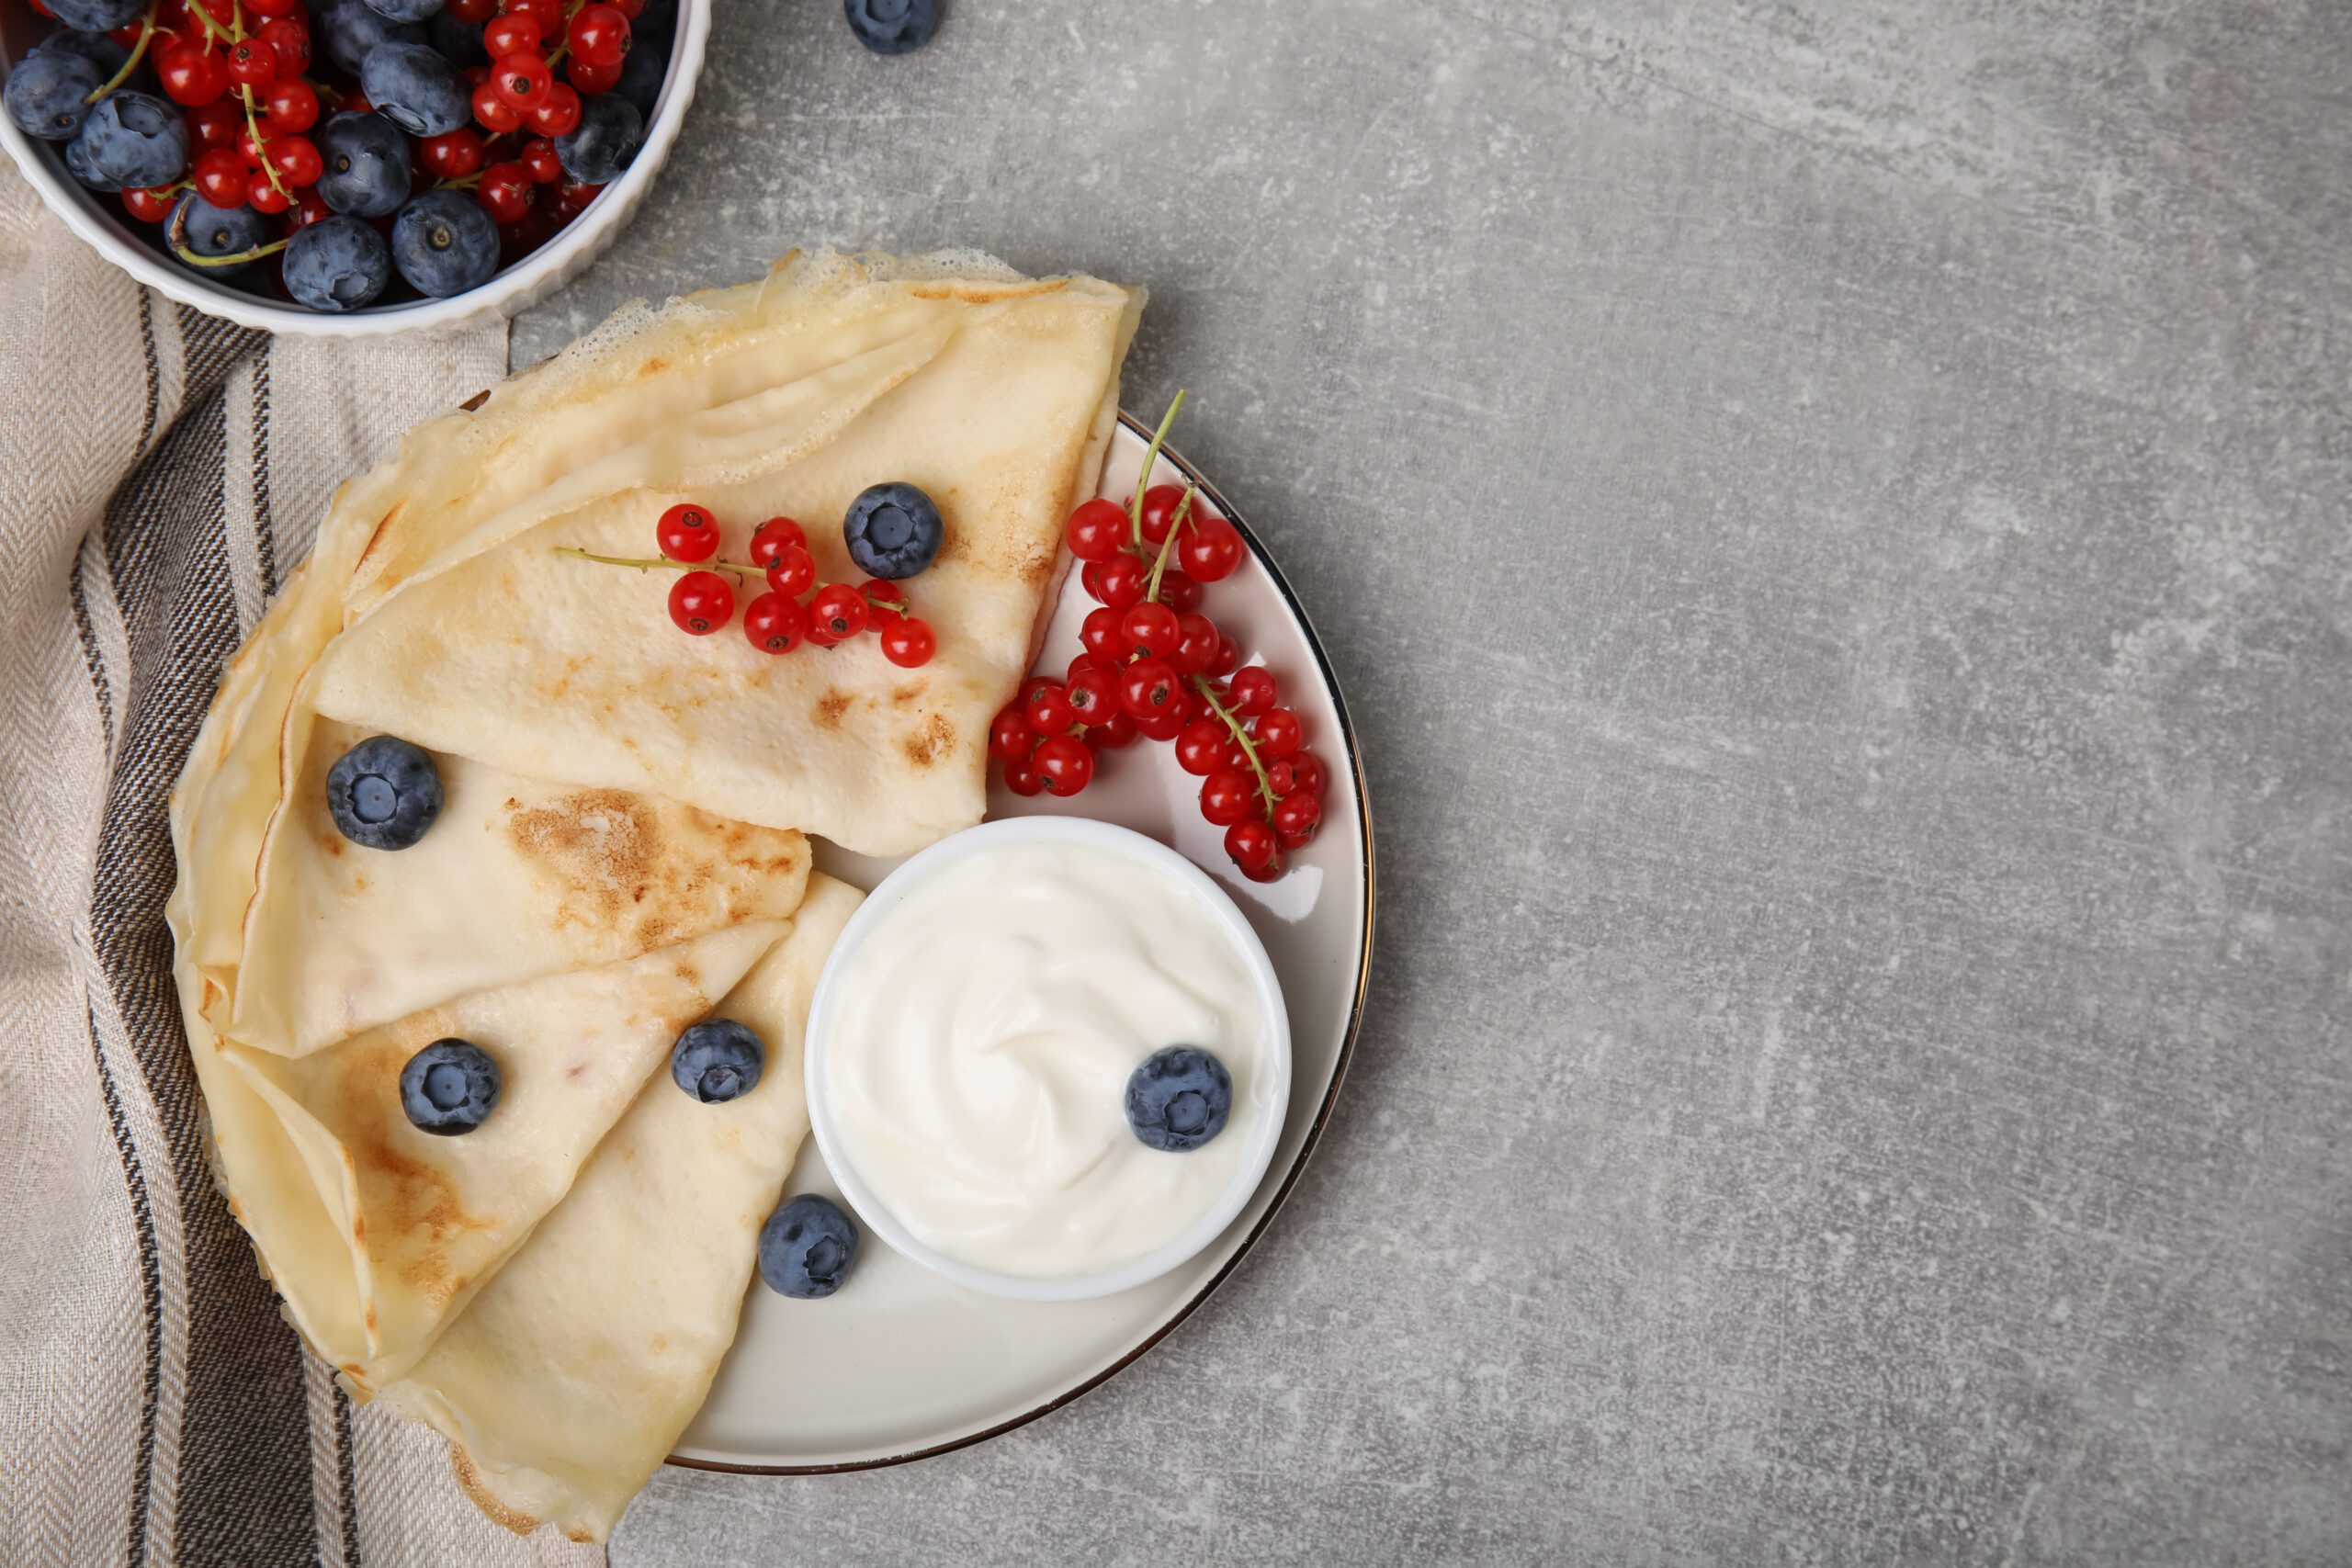 Delicious crepes with natural yogurt, blueberries and red curran